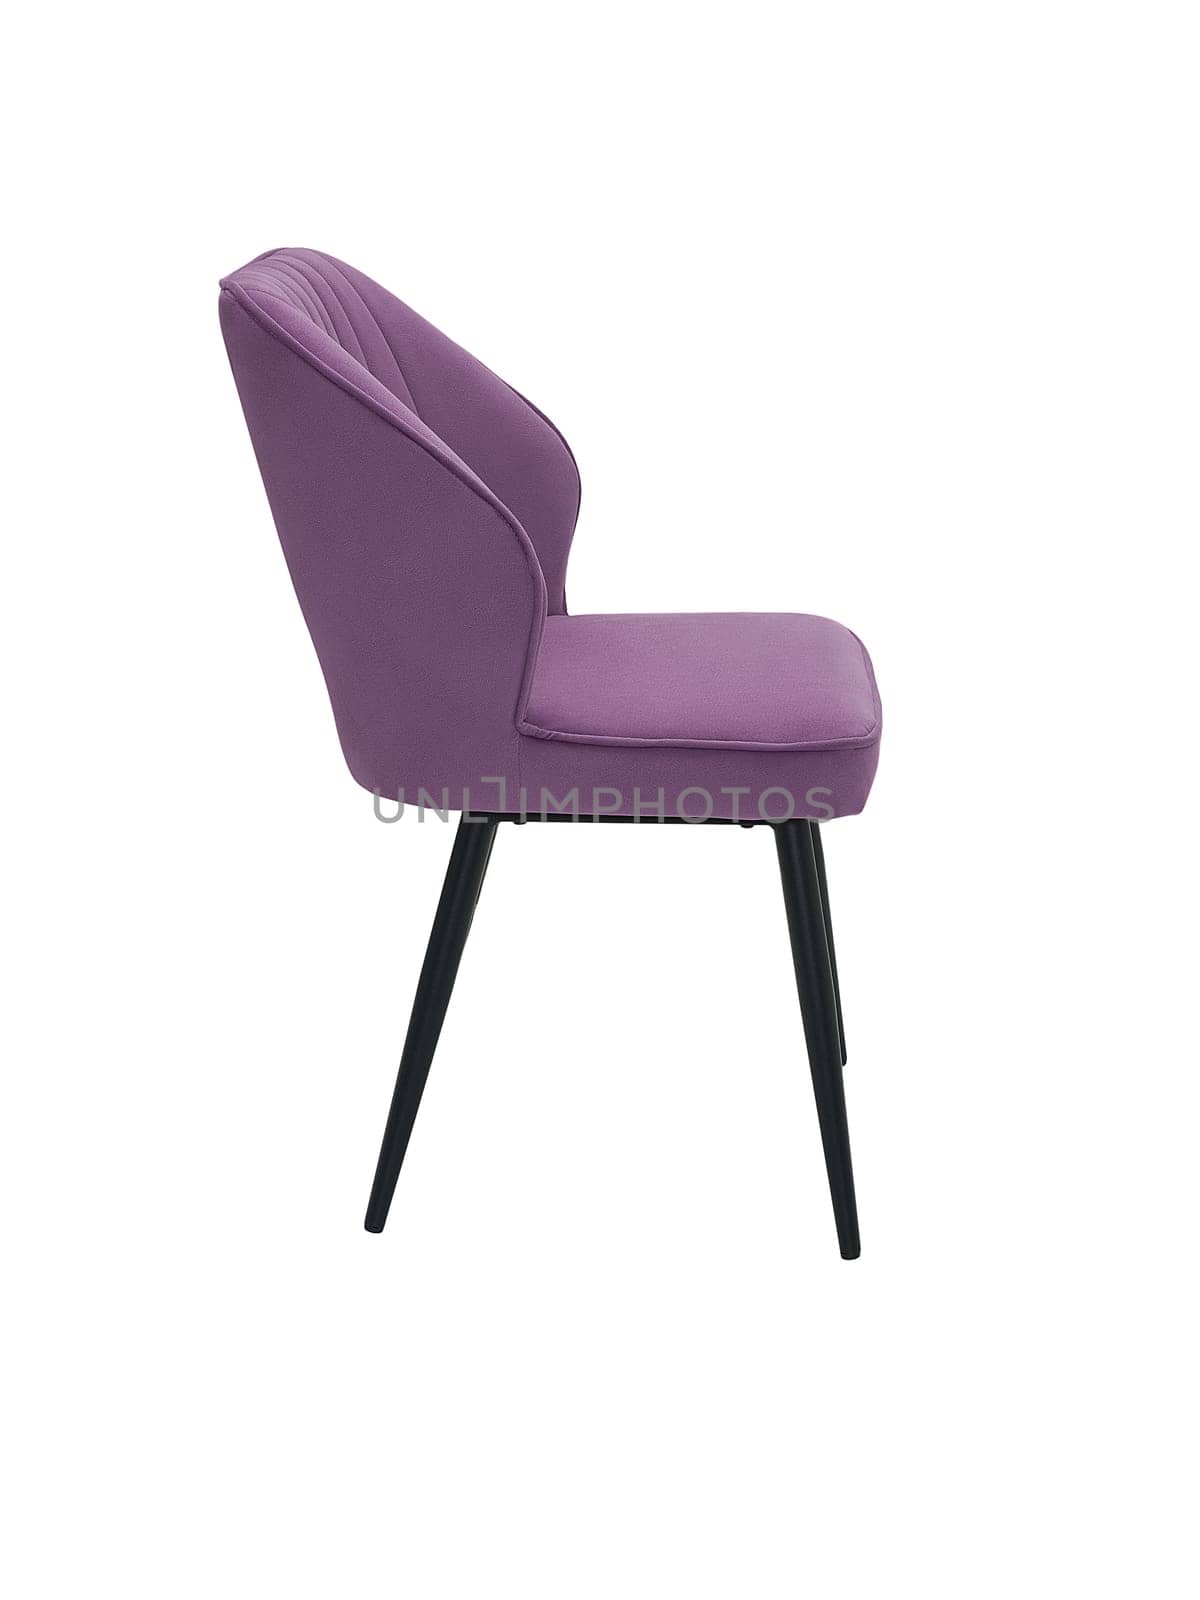 modern purple fabric chair with wooden legs isolated on white background, side view. contemporary furniture in classical style, interior, home design